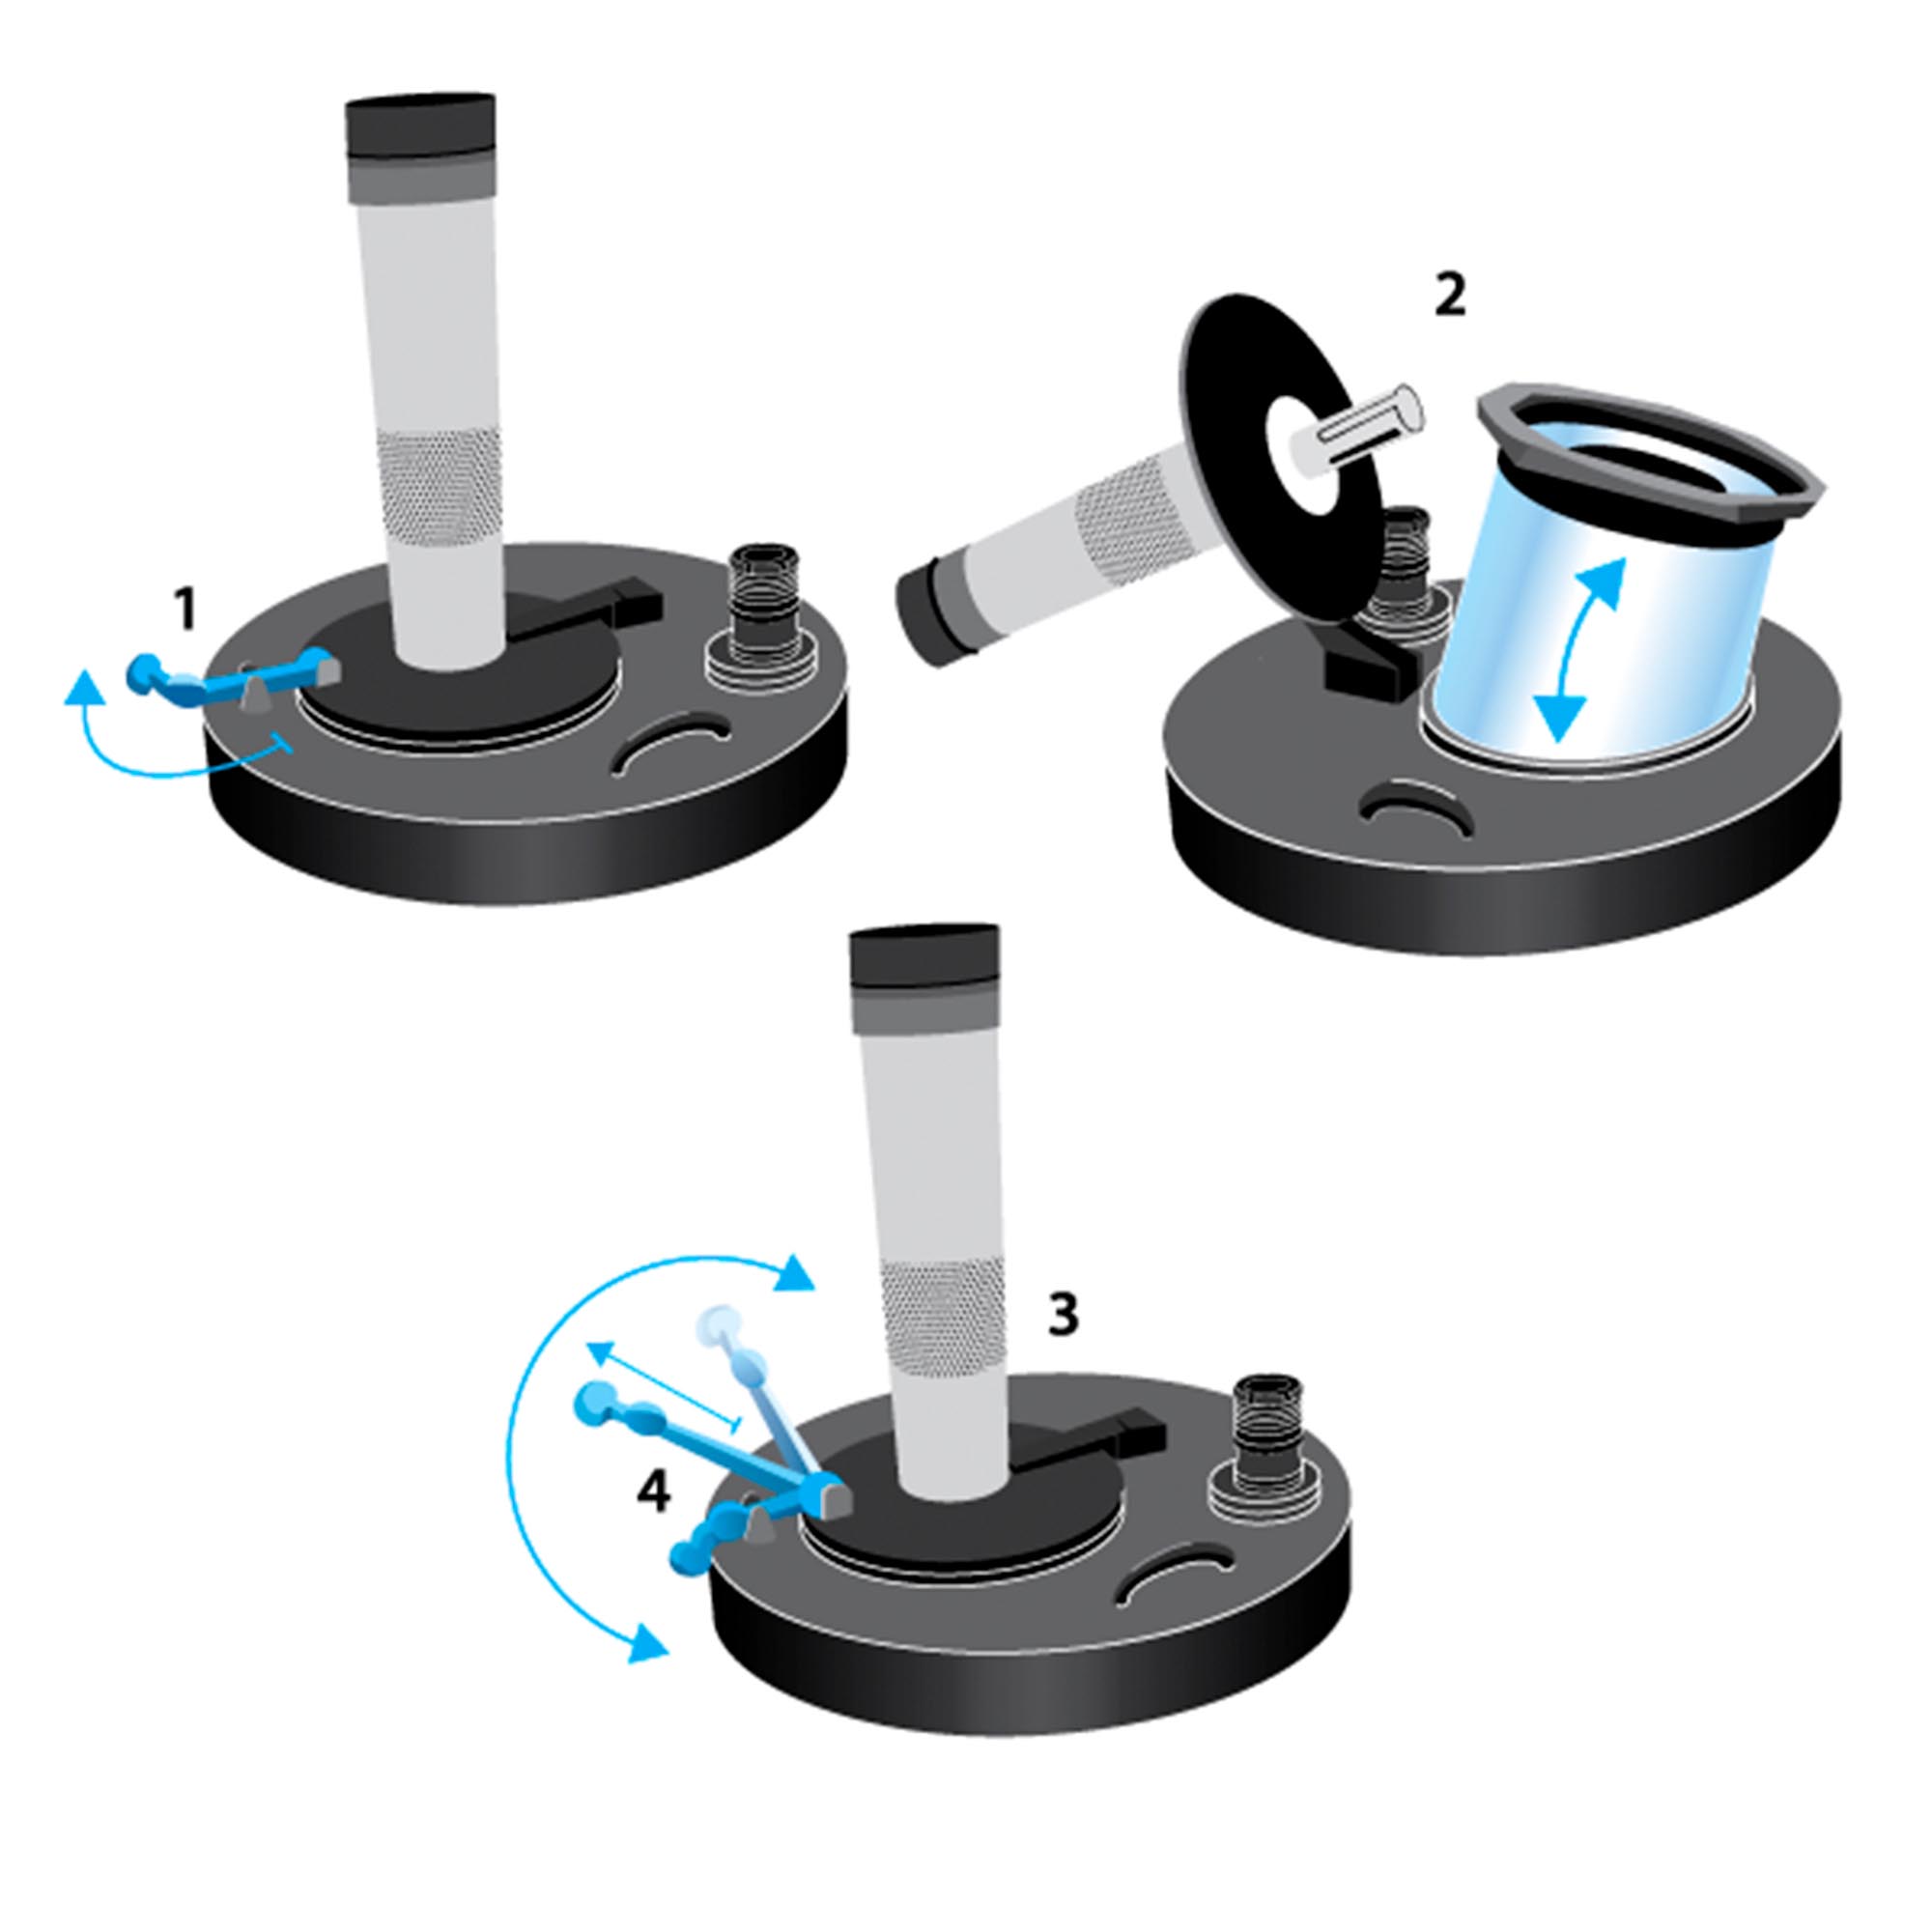 How the EasySwitch Wet-Dry Vac Works